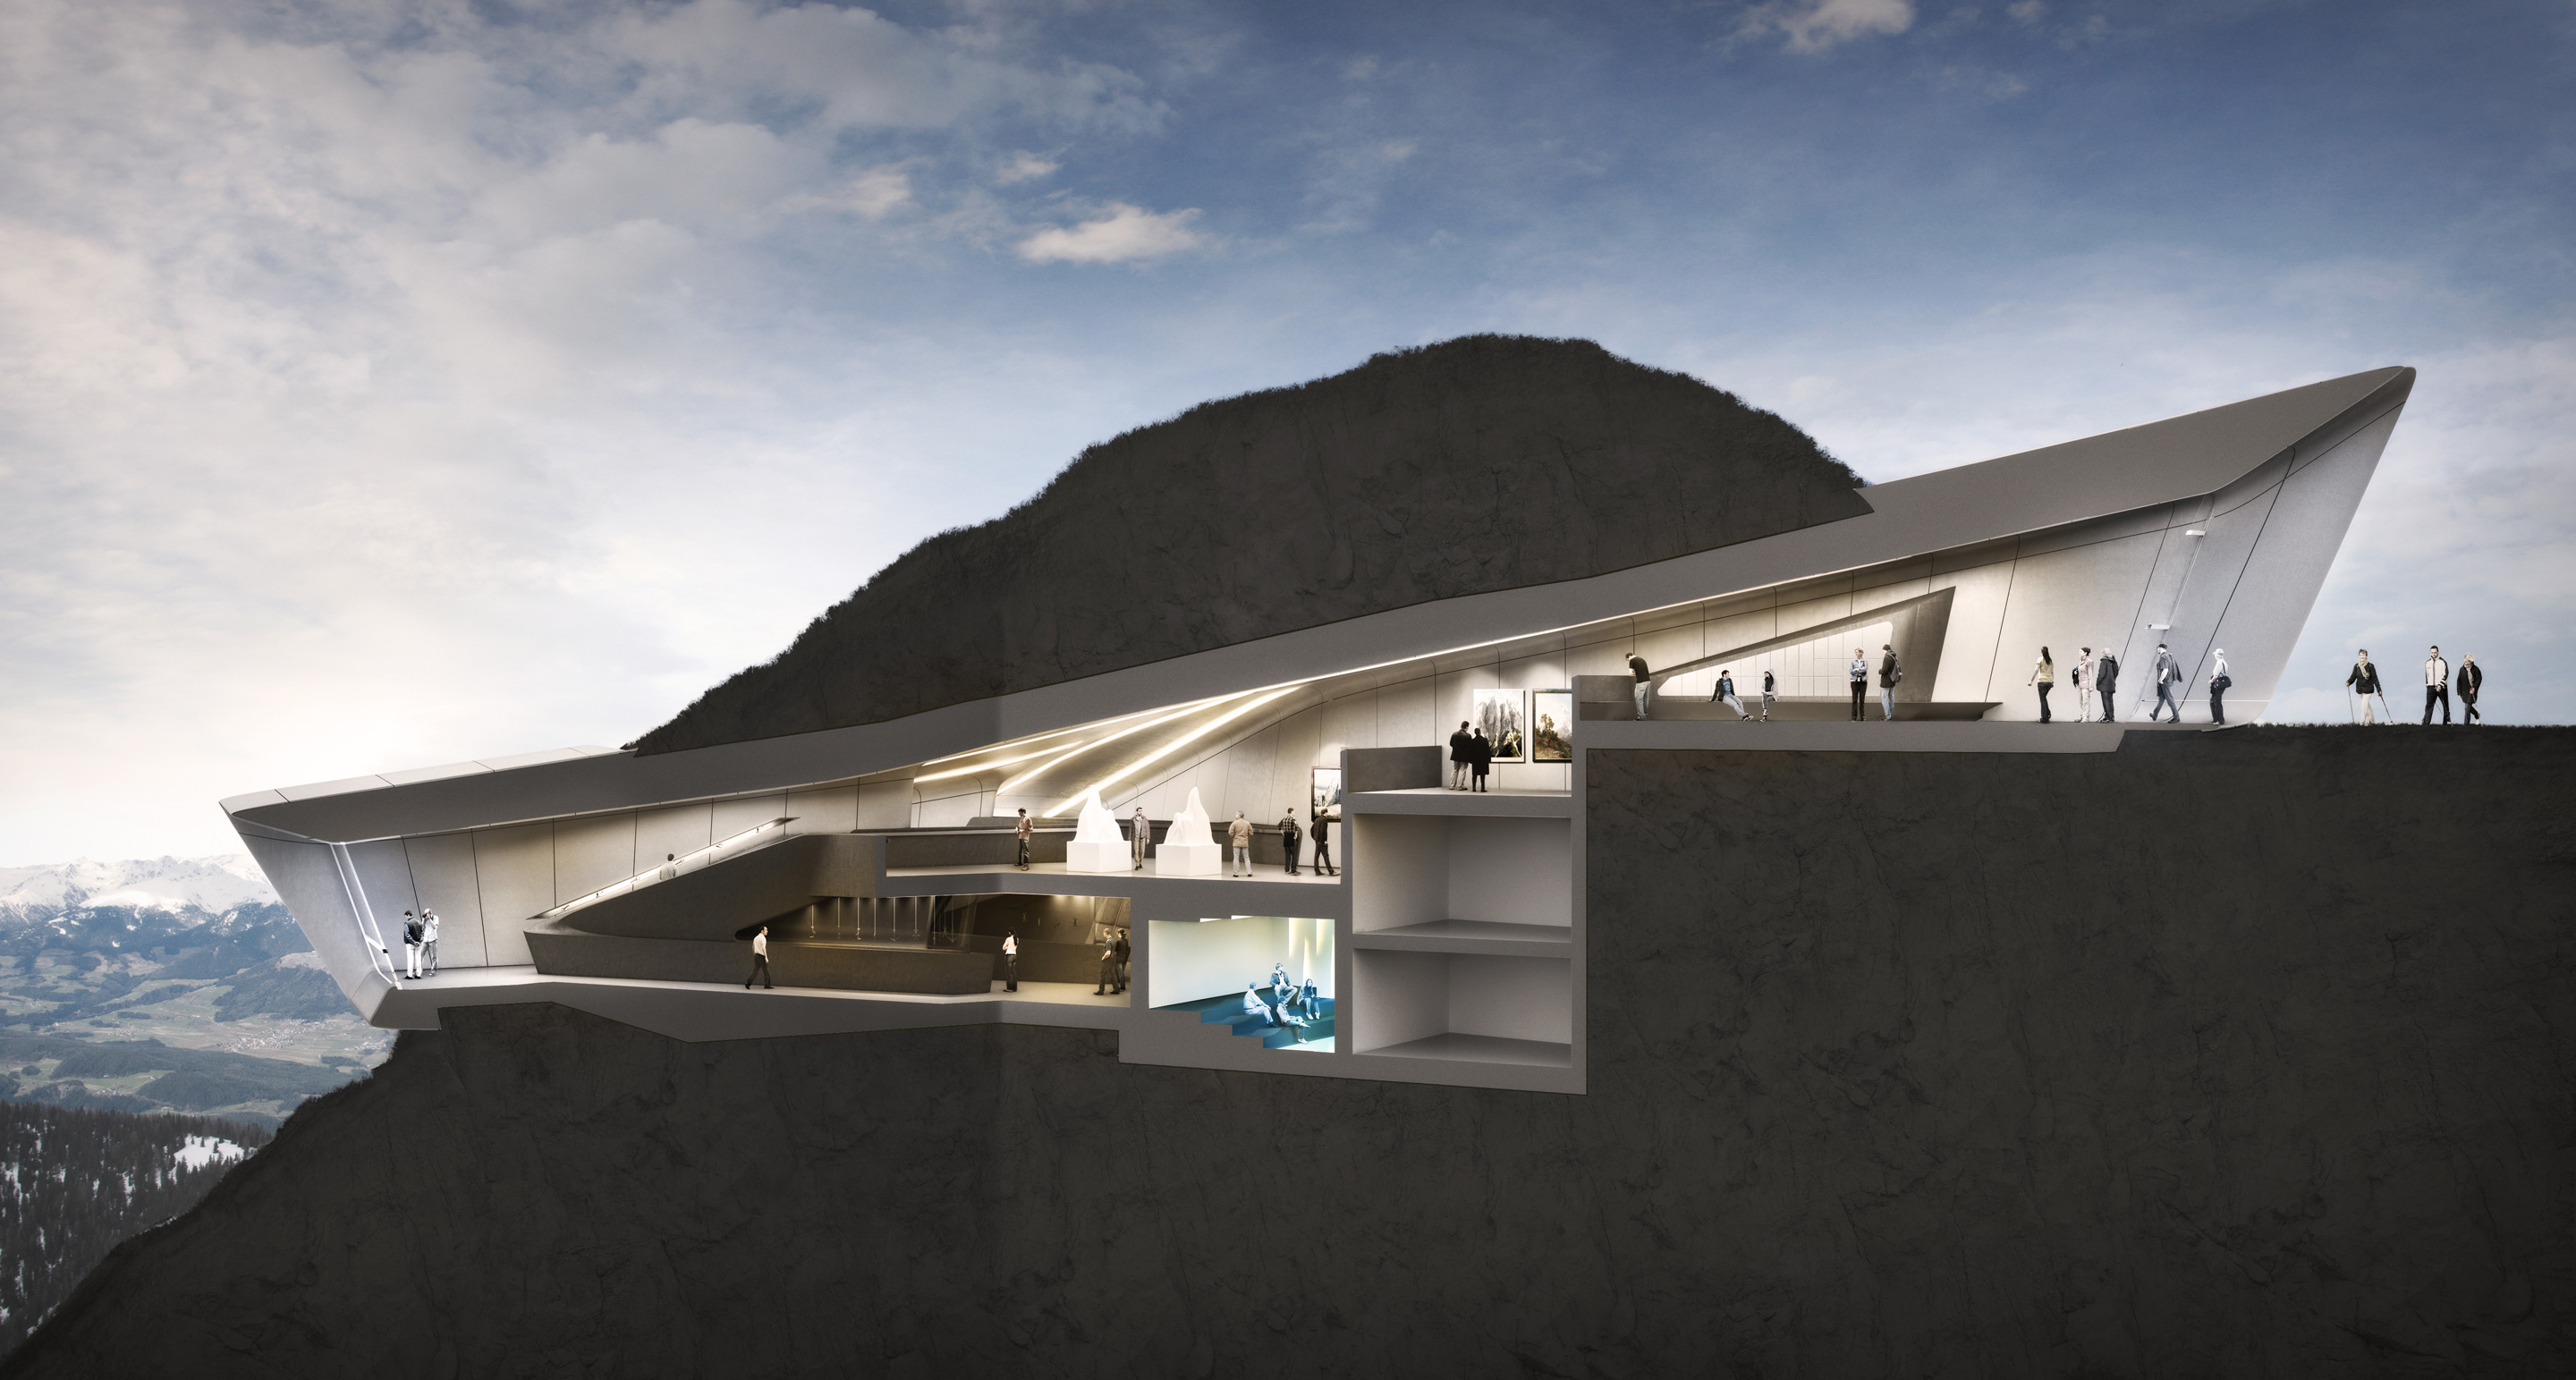 Messner Mountain Museum Corones section by Zaha Hadid Architects